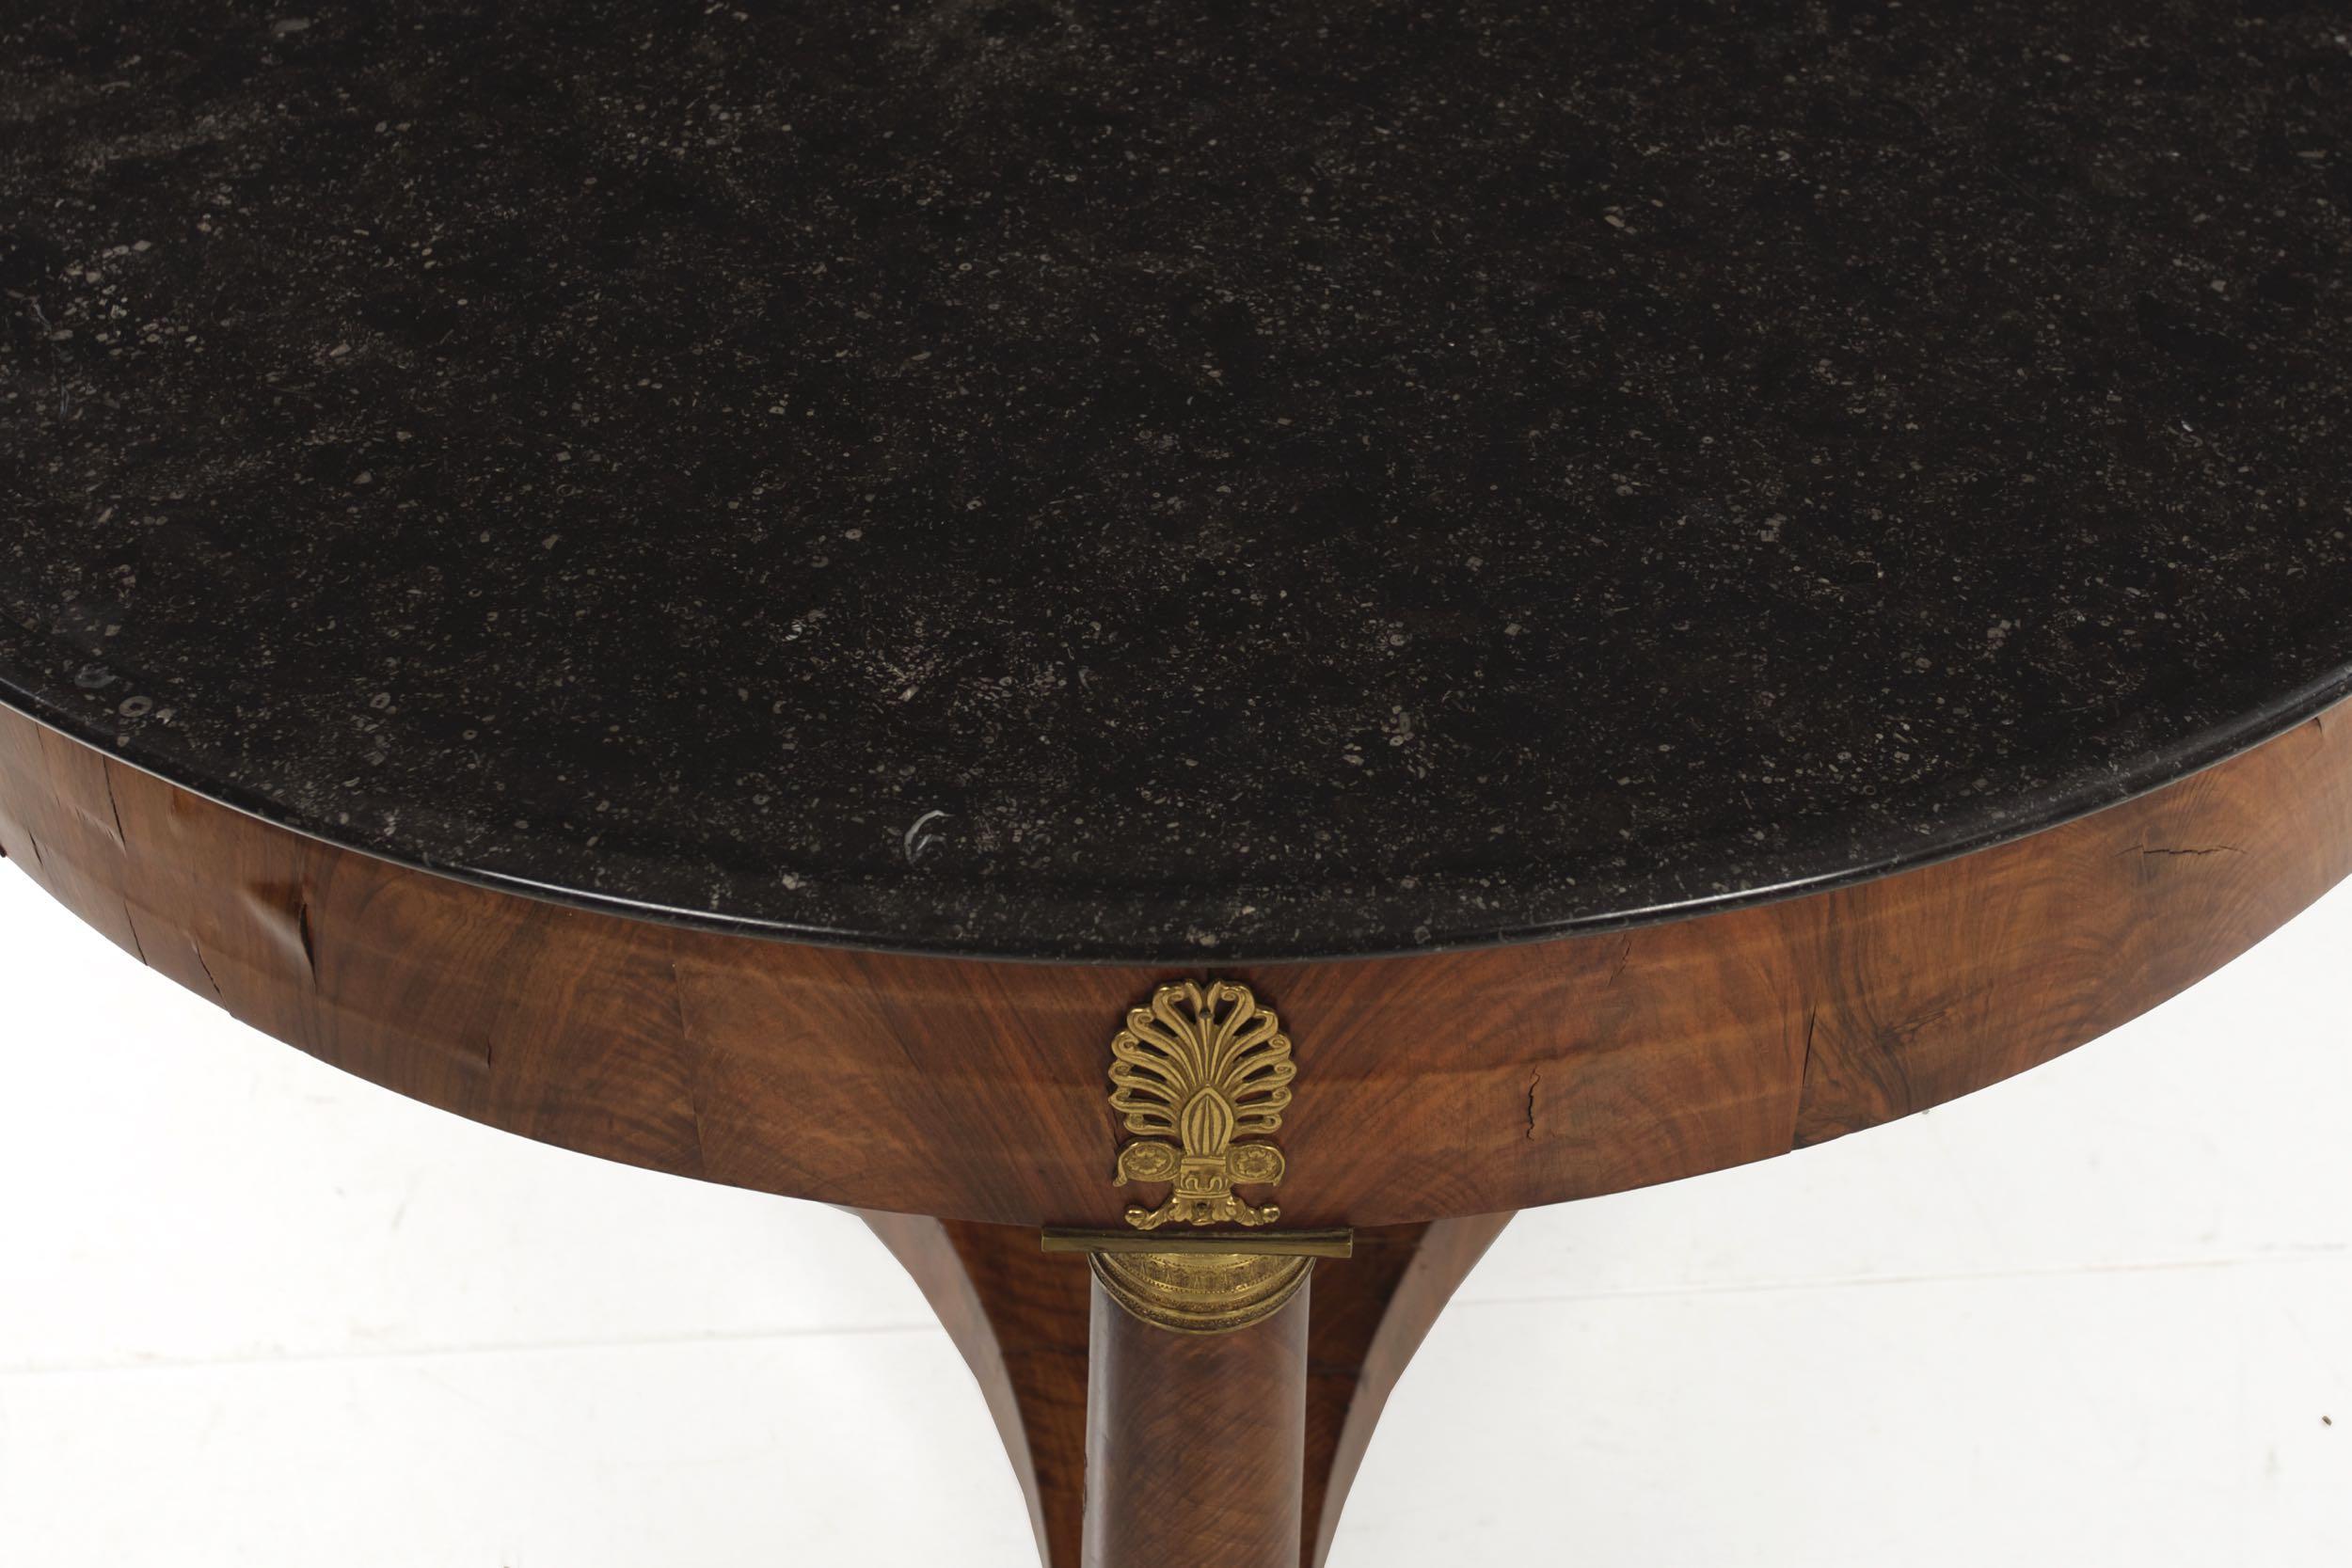 French Empire Antique Burl Walnut Center Table with Black Marble Top, circa 1815 For Sale 13